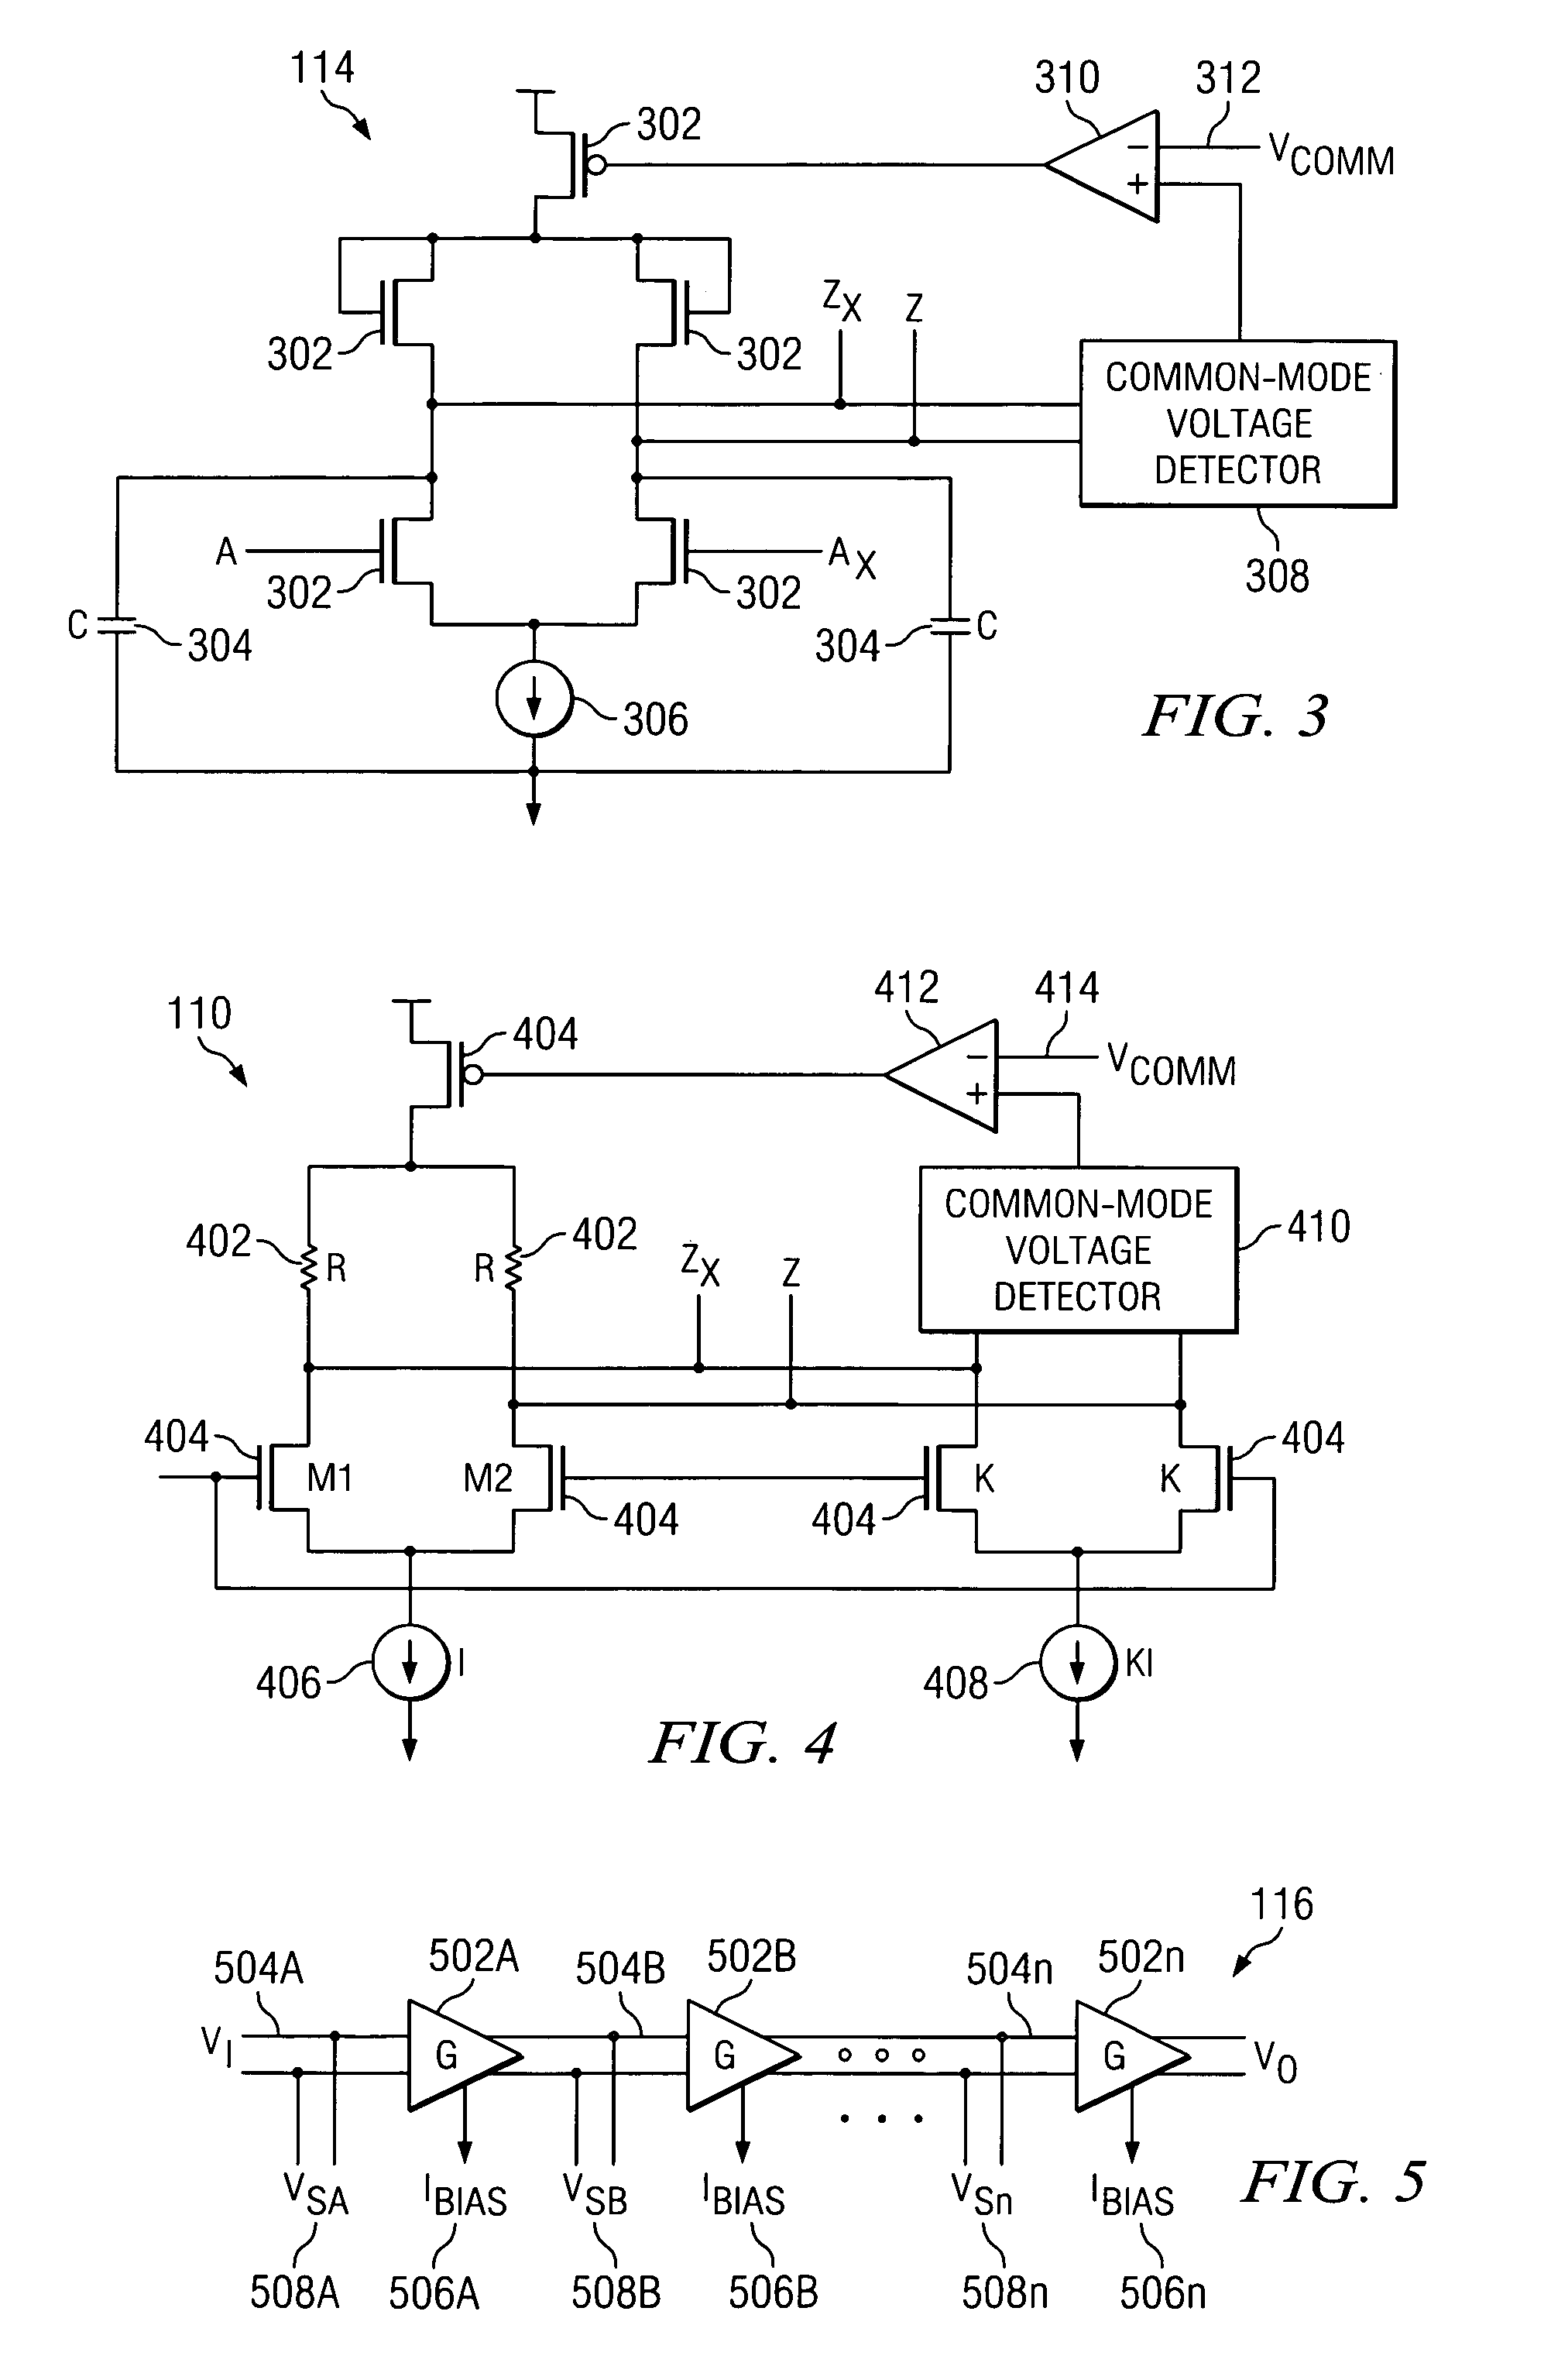 Correcting DC offsets in a multi-stage amplifier